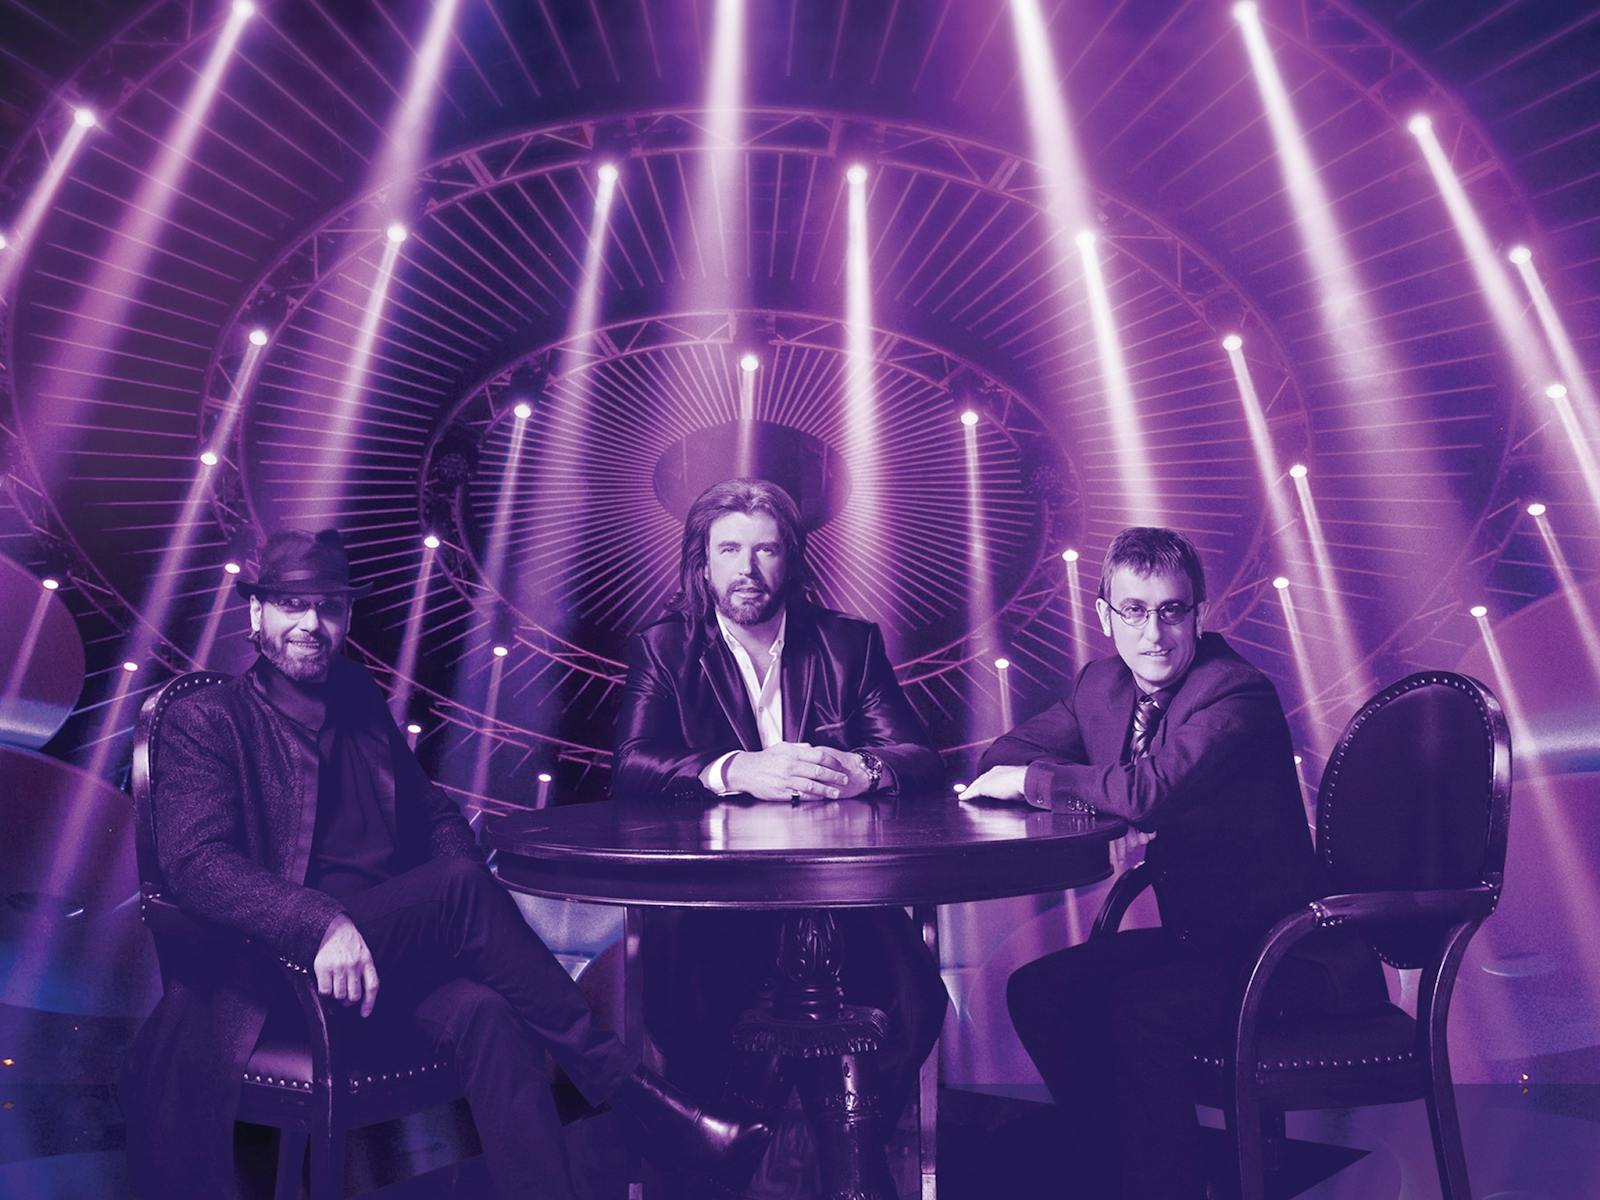 Image for The Australian Bee Gees Show - 25th Anniversary Tour - Wyong